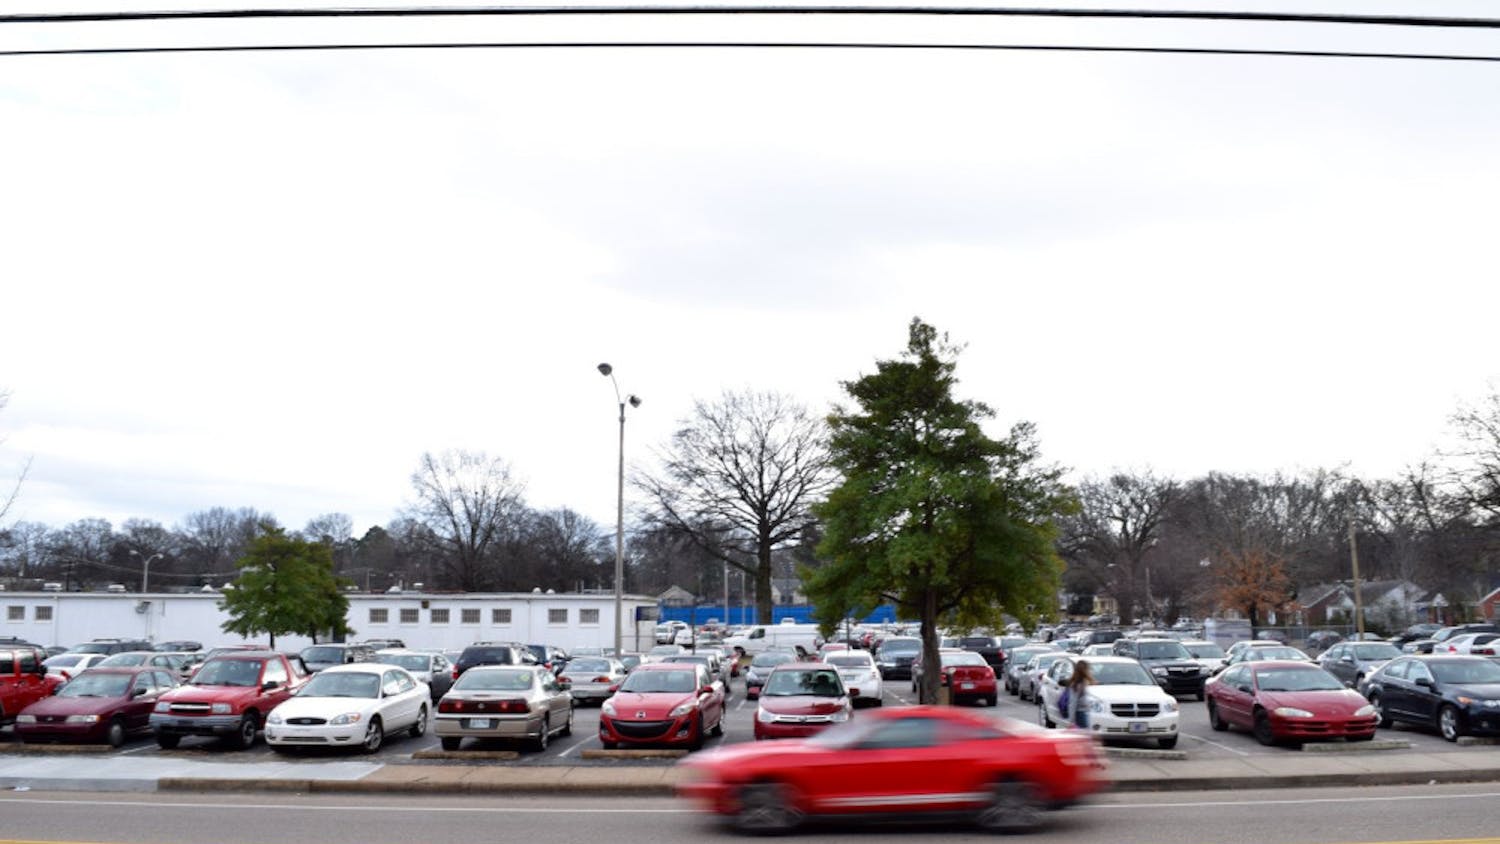 Parking on Southern Ave. Site of Future recreation center